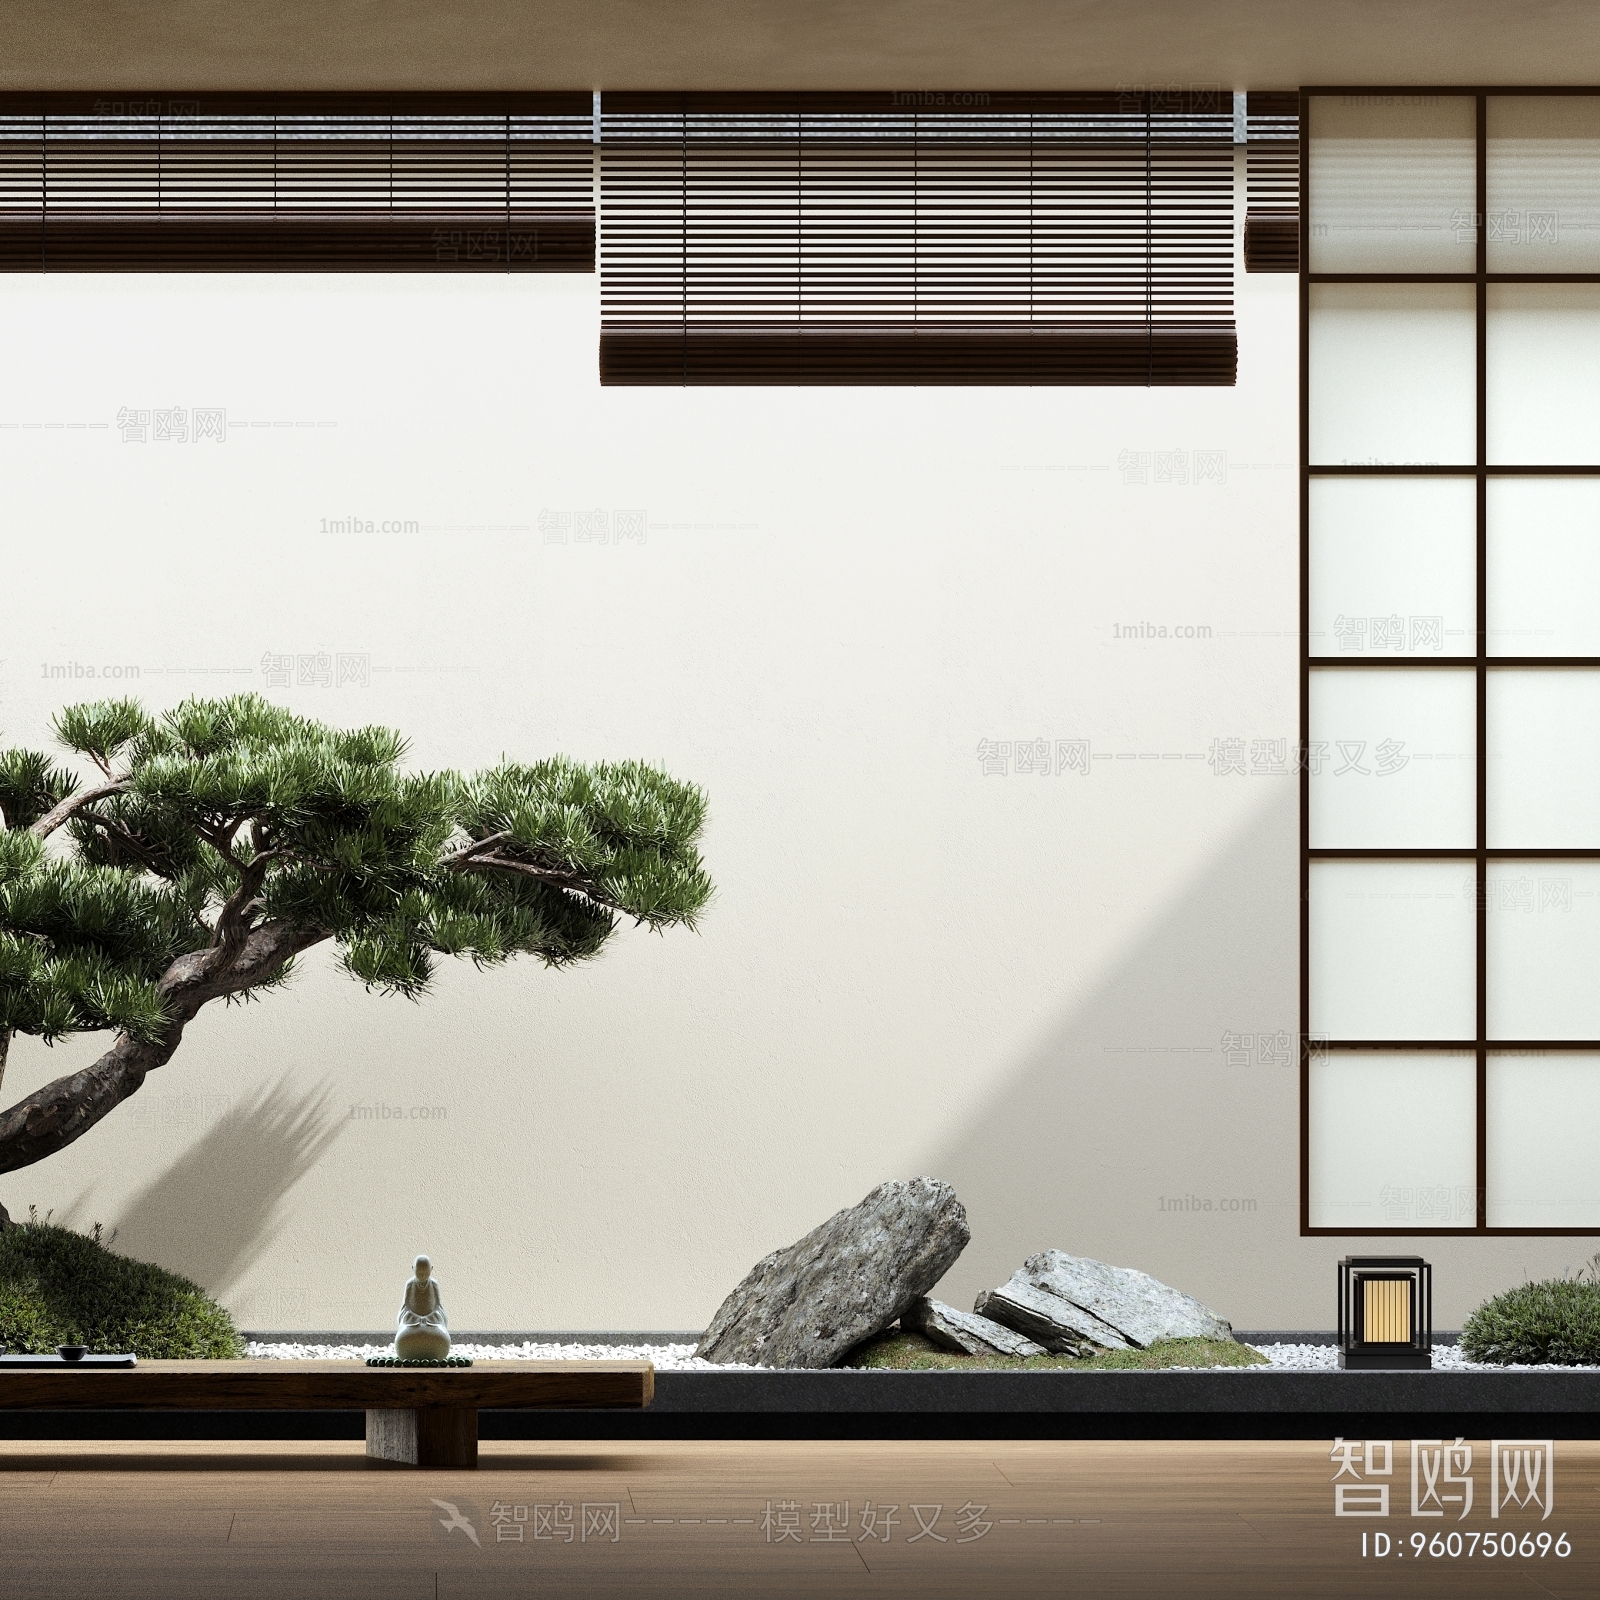 New Chinese Style Japanese Style Plant Landscaping